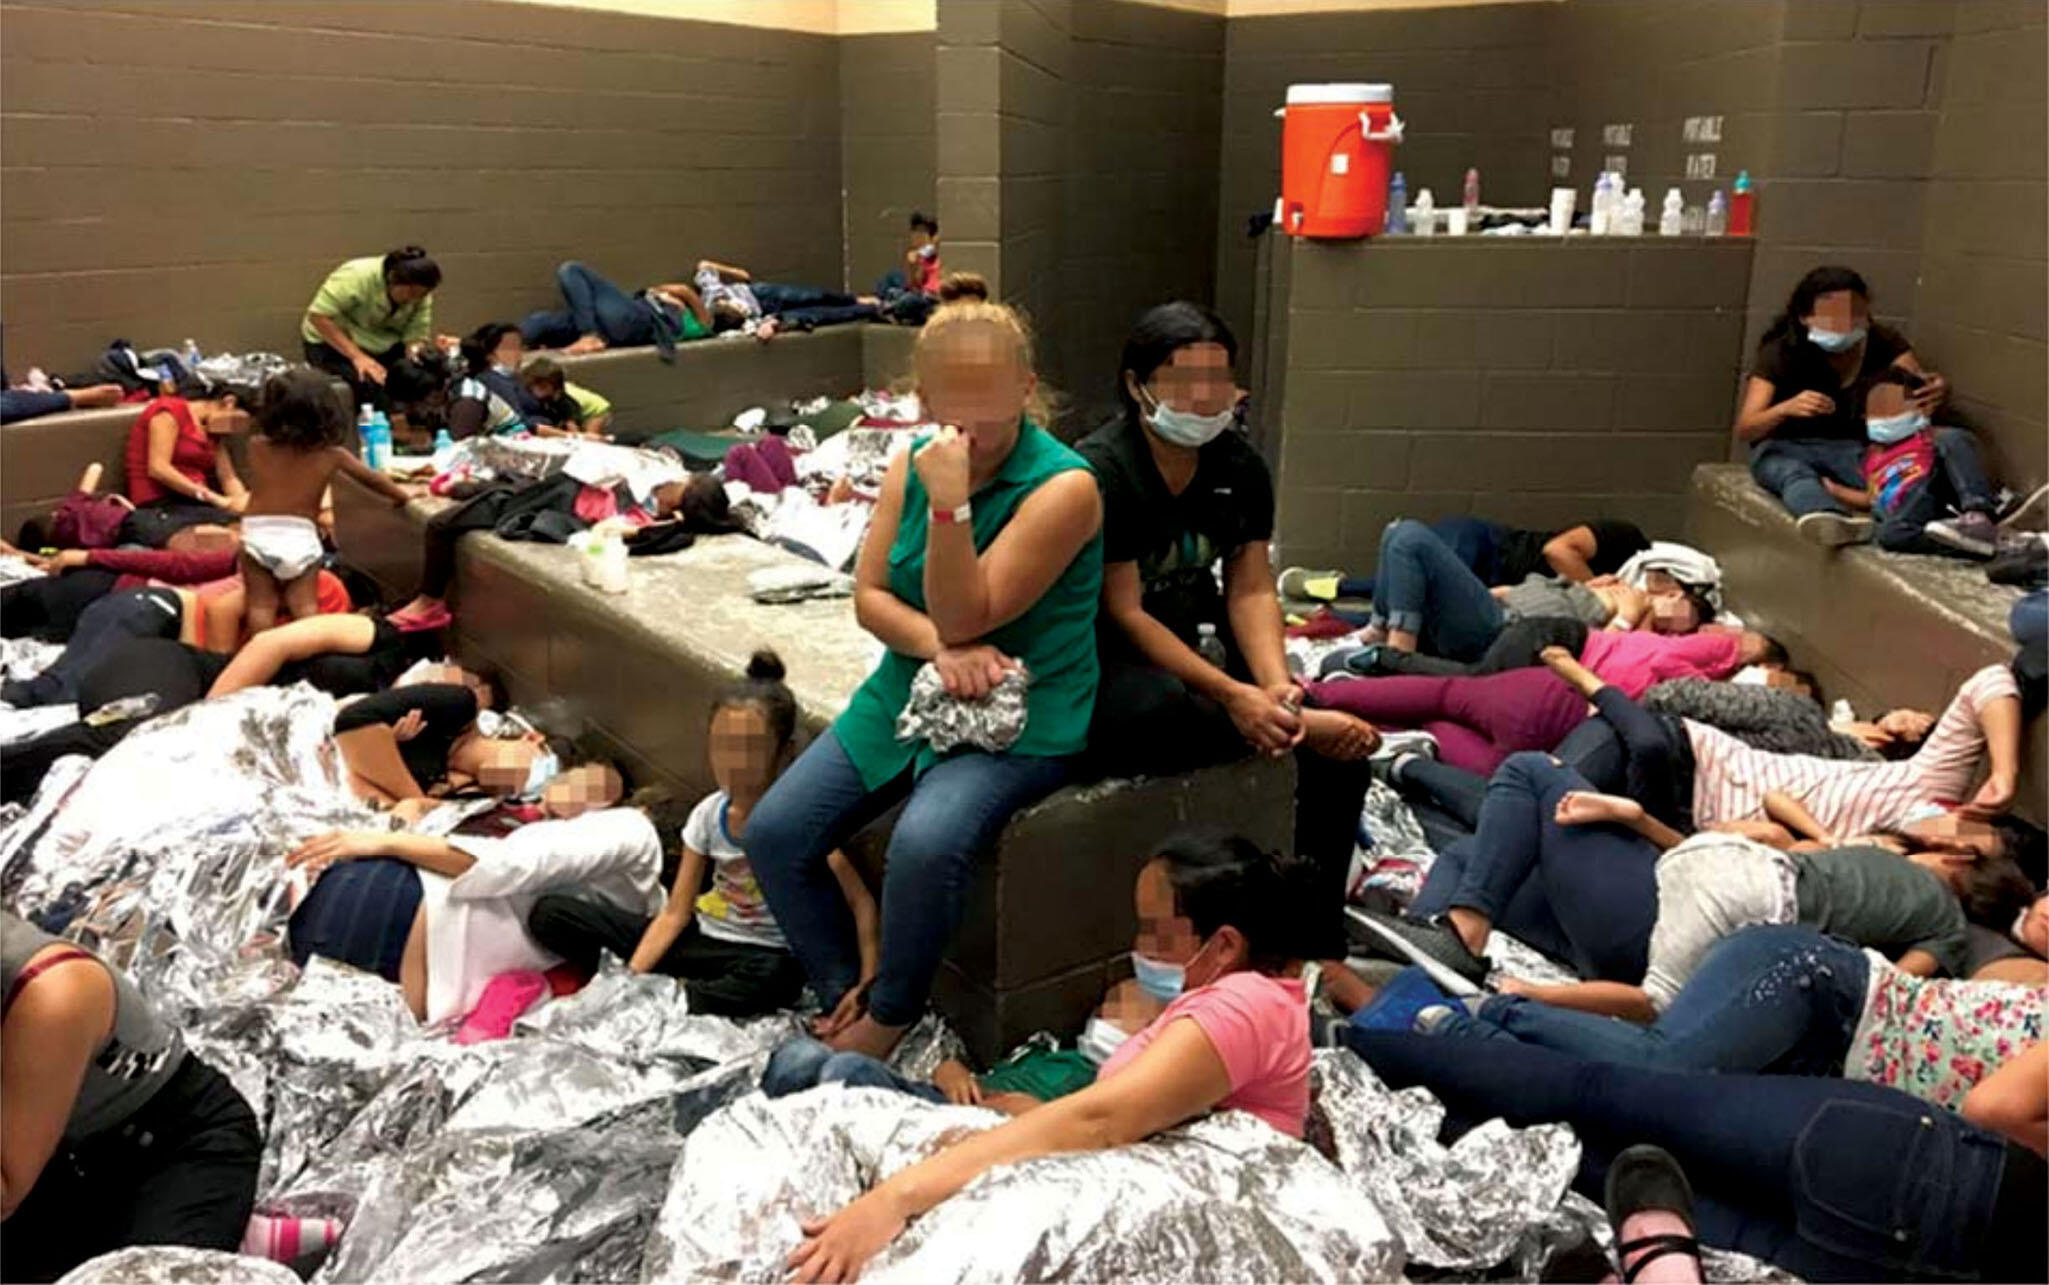 Families detained at the overcrowded Customs and Border Patrol station in Weslaco, Texas, June 2019. (Photo from Department of Homeland Security, Office of the Inspector General.)